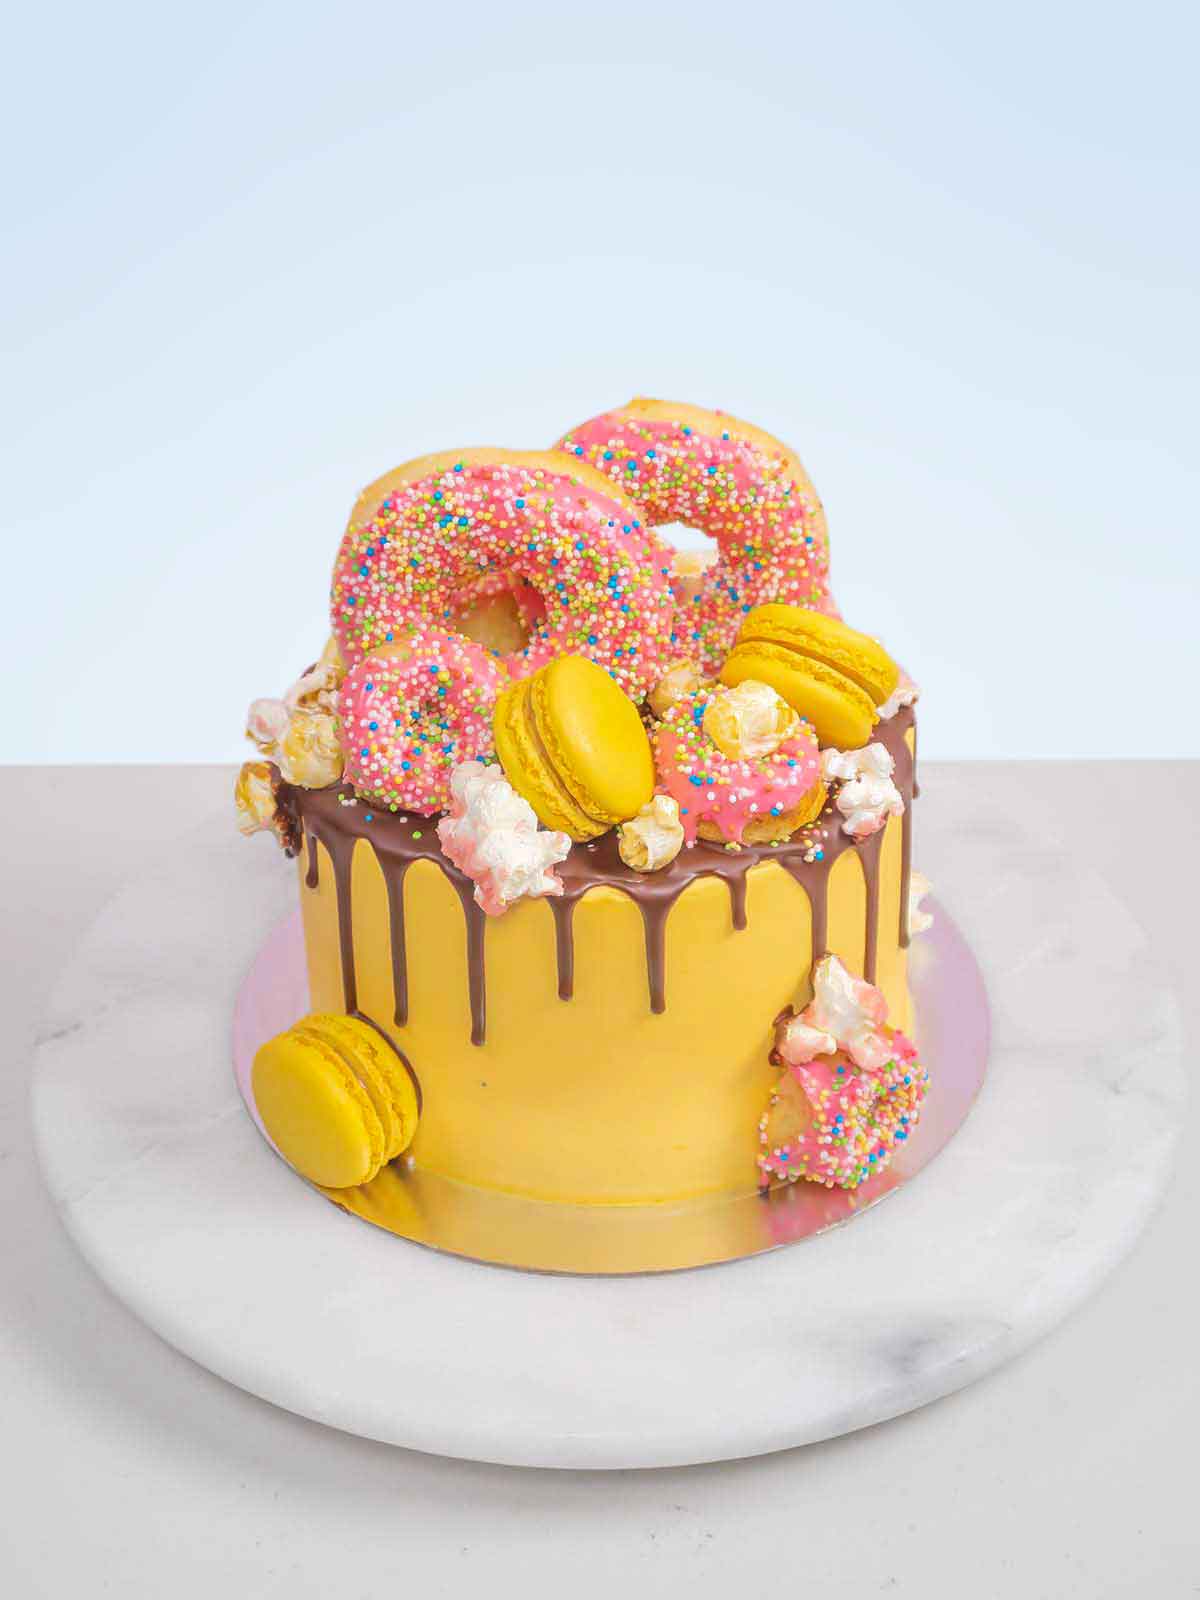 The Homer Simpson Cake to Buy